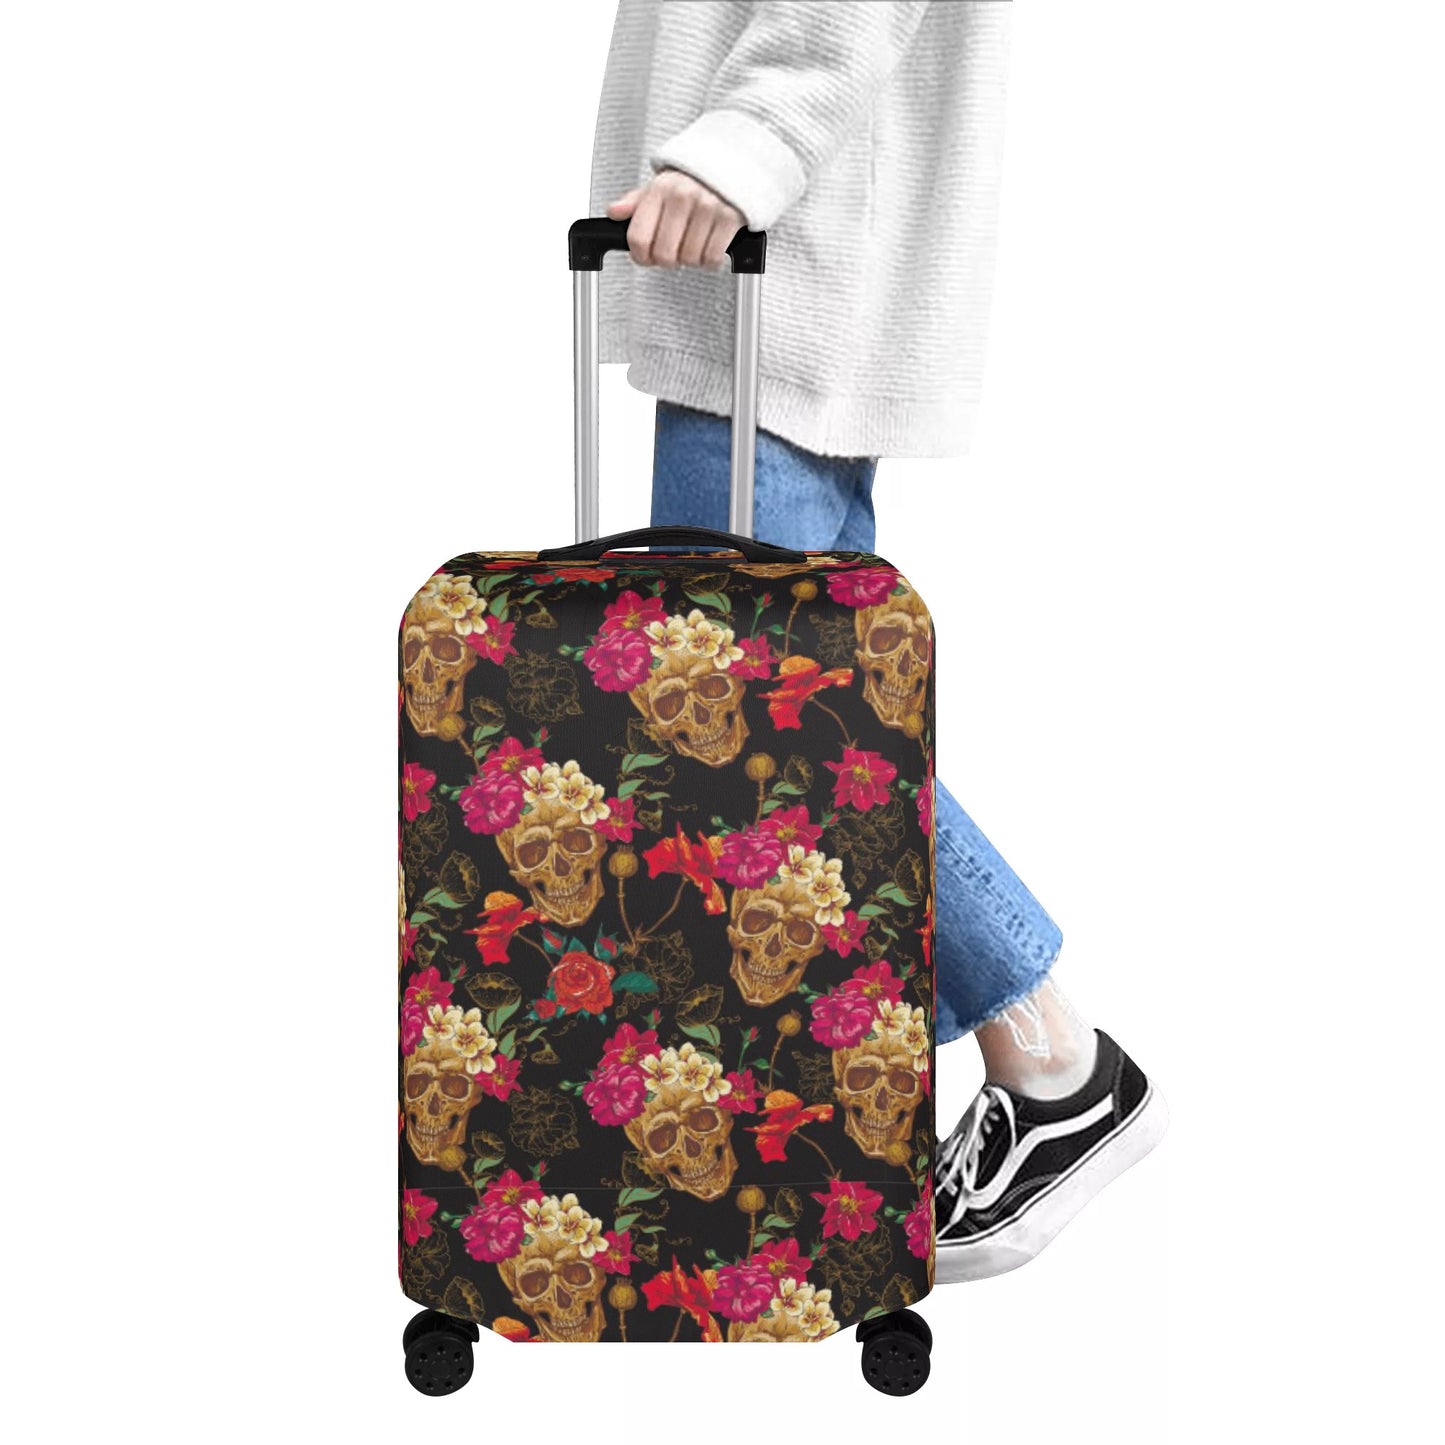 Floral sugar skull Polyester Luggage Cover